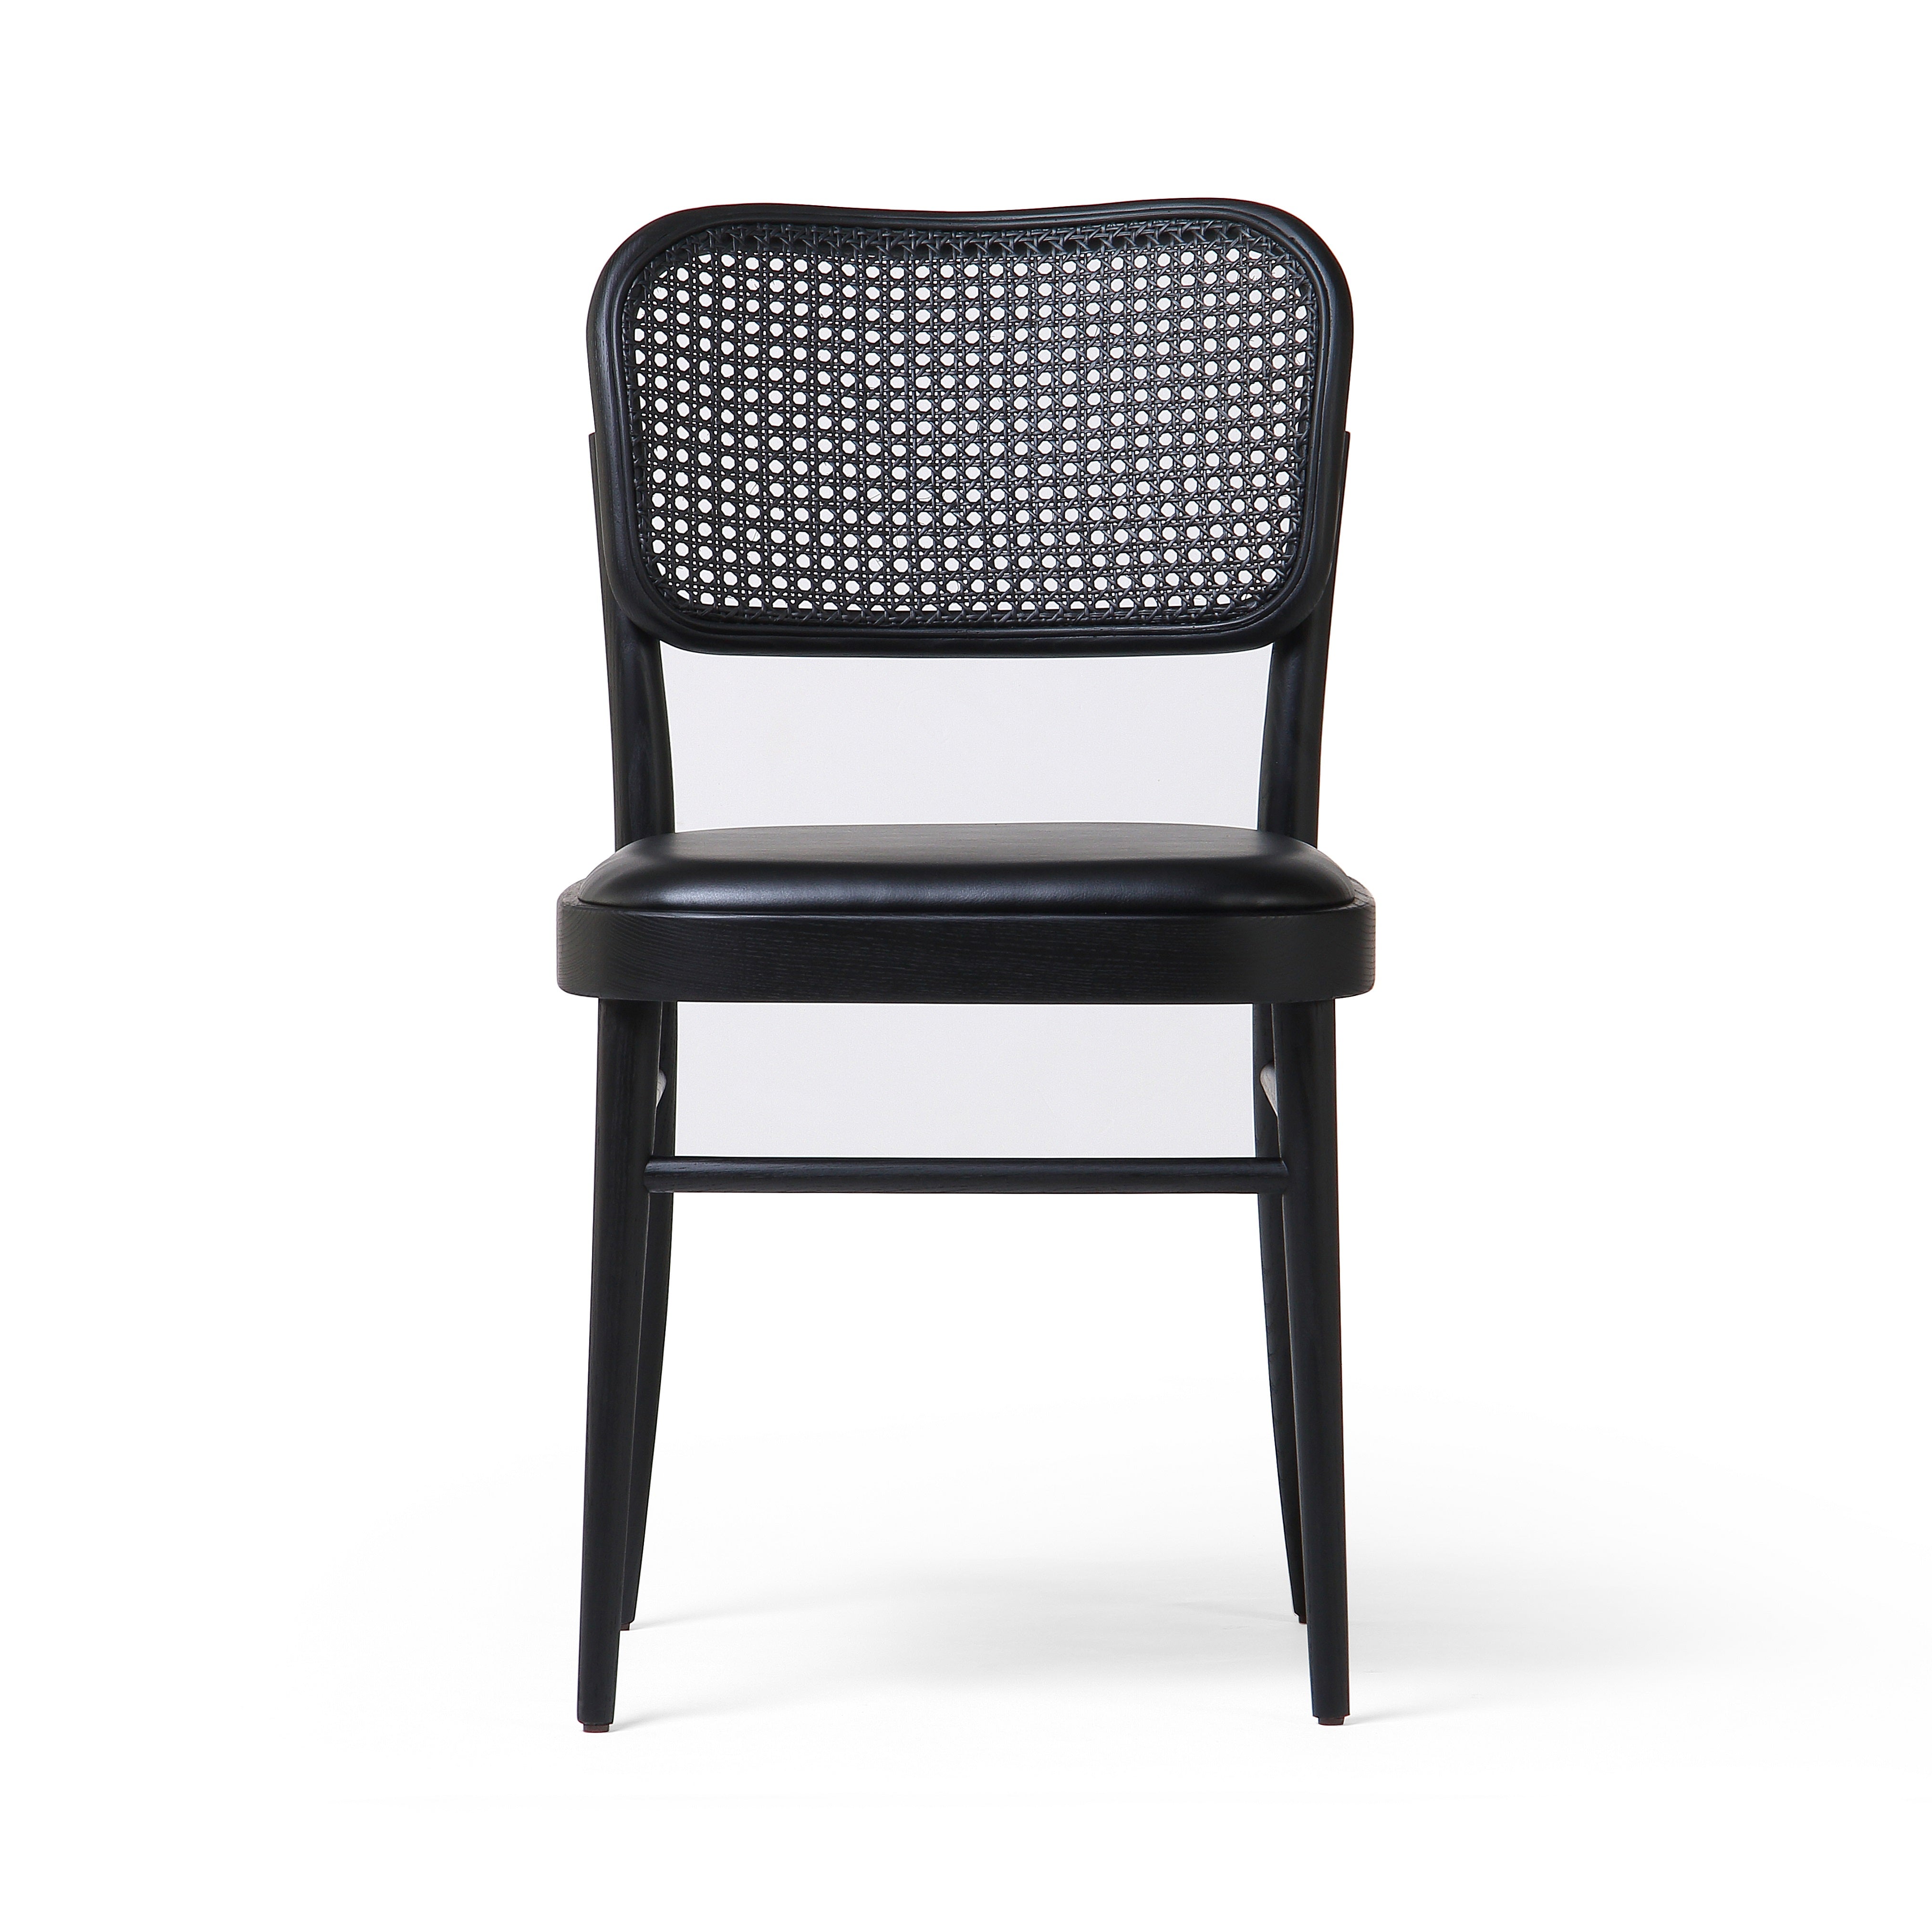 Inspired by the Thonet chair popularized in the mid-century, the Court Black Ash Dining Chair forms a simple but-shapely frame for black seating and a natural cane back. Amethyst Home provides interior design services, furniture, rugs, and lighting in the Salt Lake City metro area. 